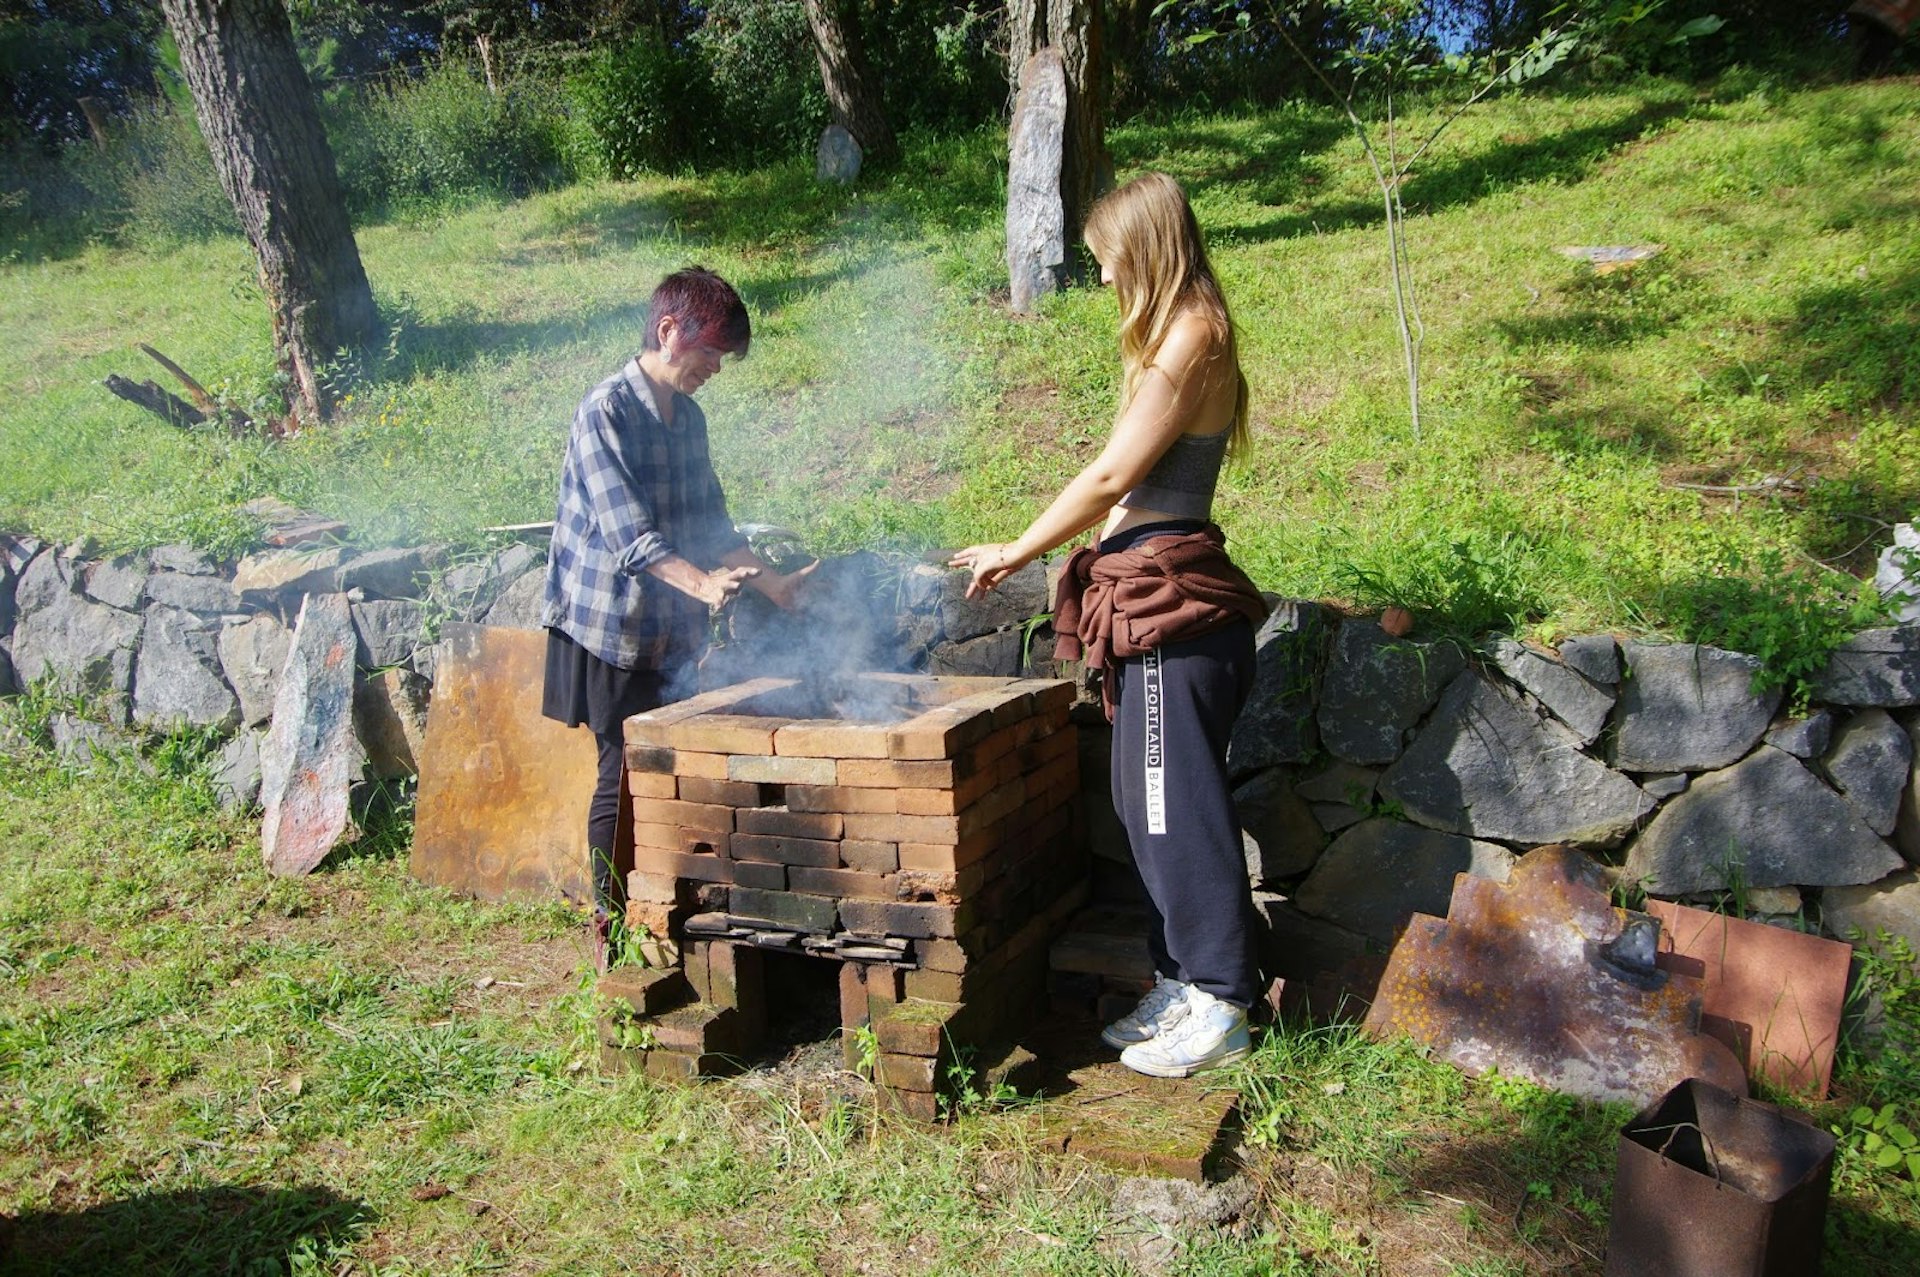 A young apprentice using a kiln